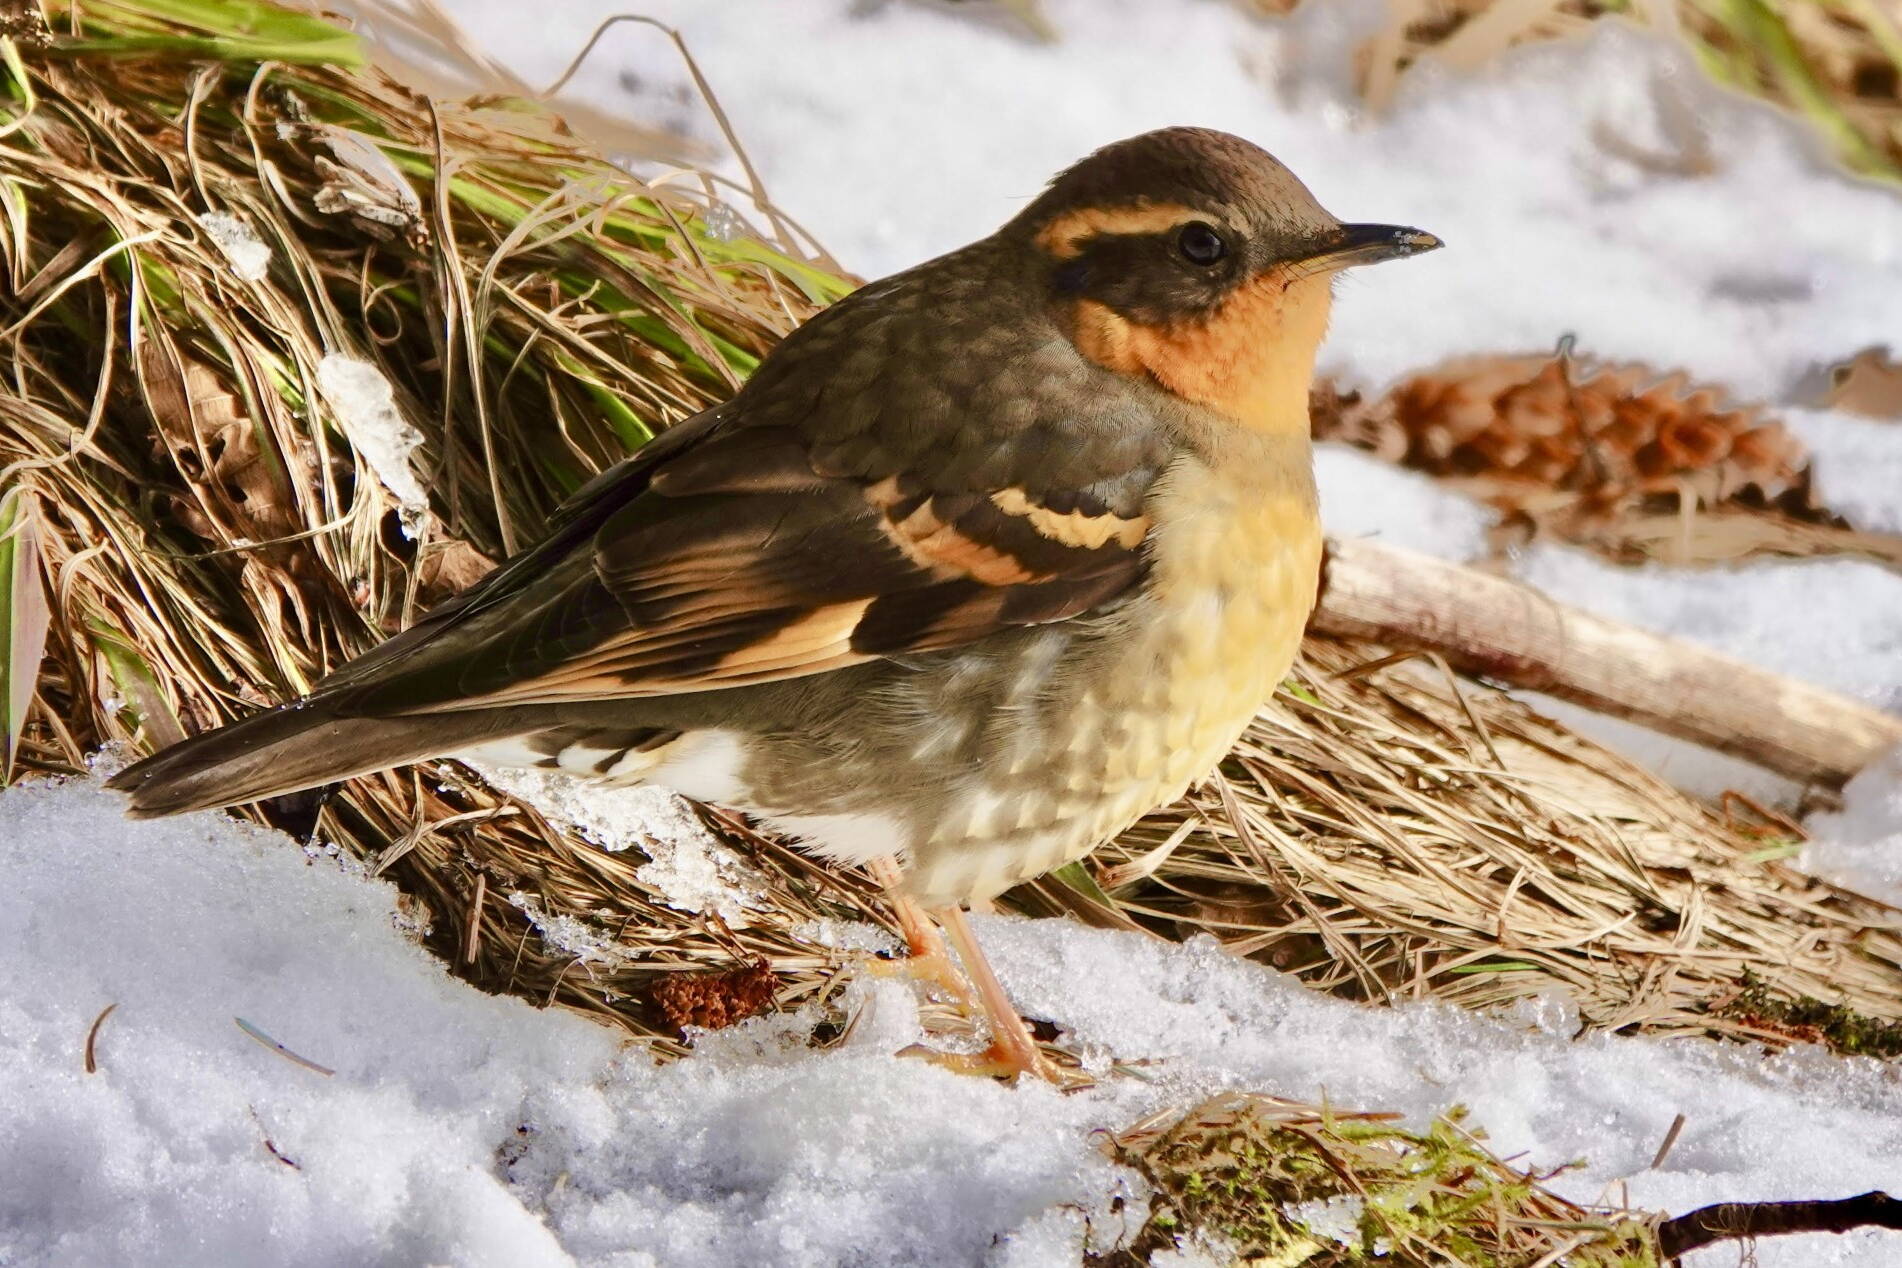 A female varied thrush pauses to look around during her foraging bout. (Photo by Helen Unruh)